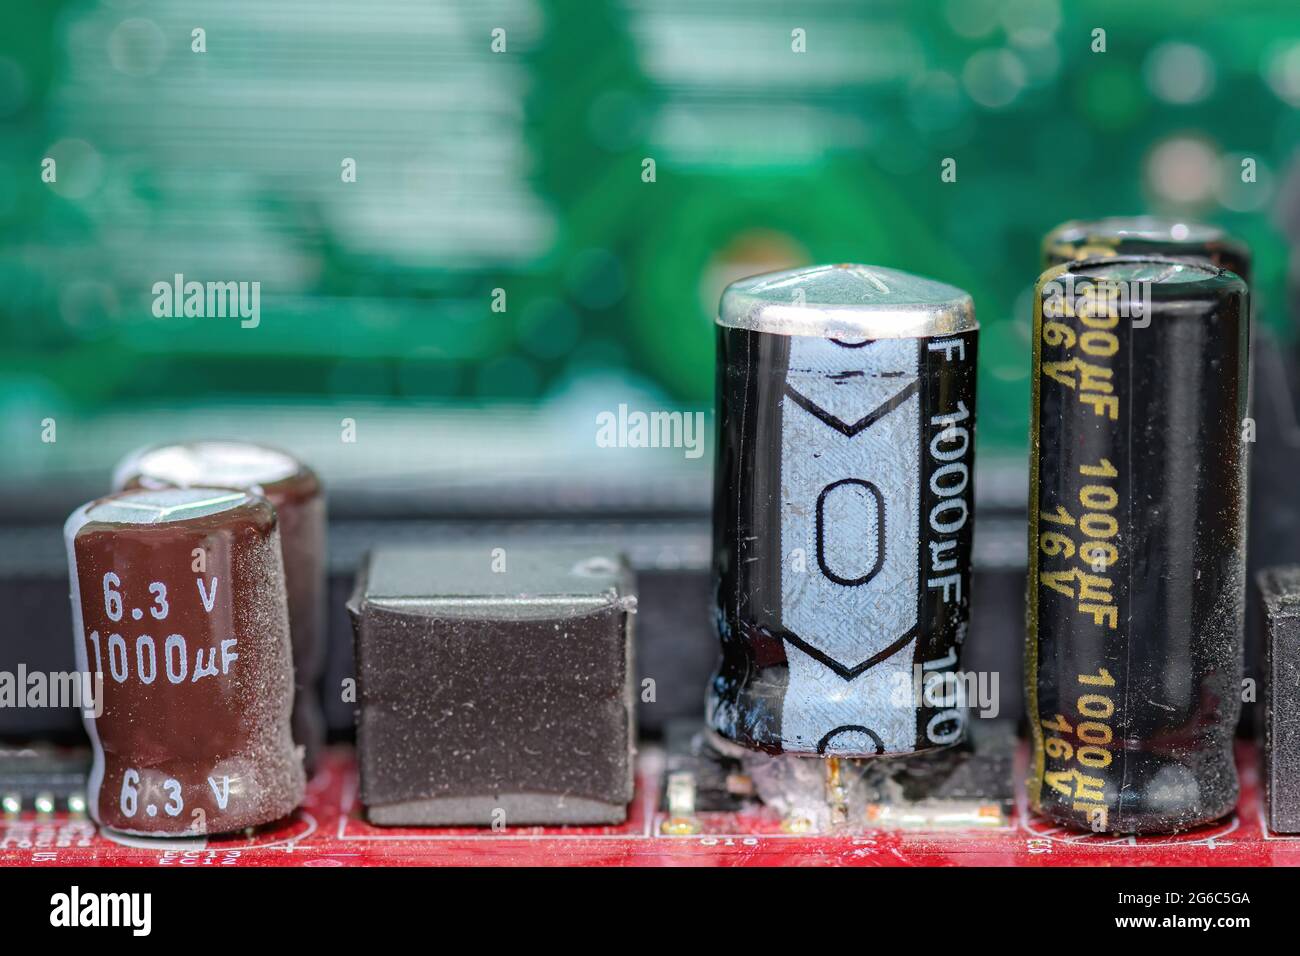 Damaged capacitor on a circuit board. Top is bulged out showing failure. Undamaged capacitors also present. No brand markings. Shallow depth of field. Stock Photo